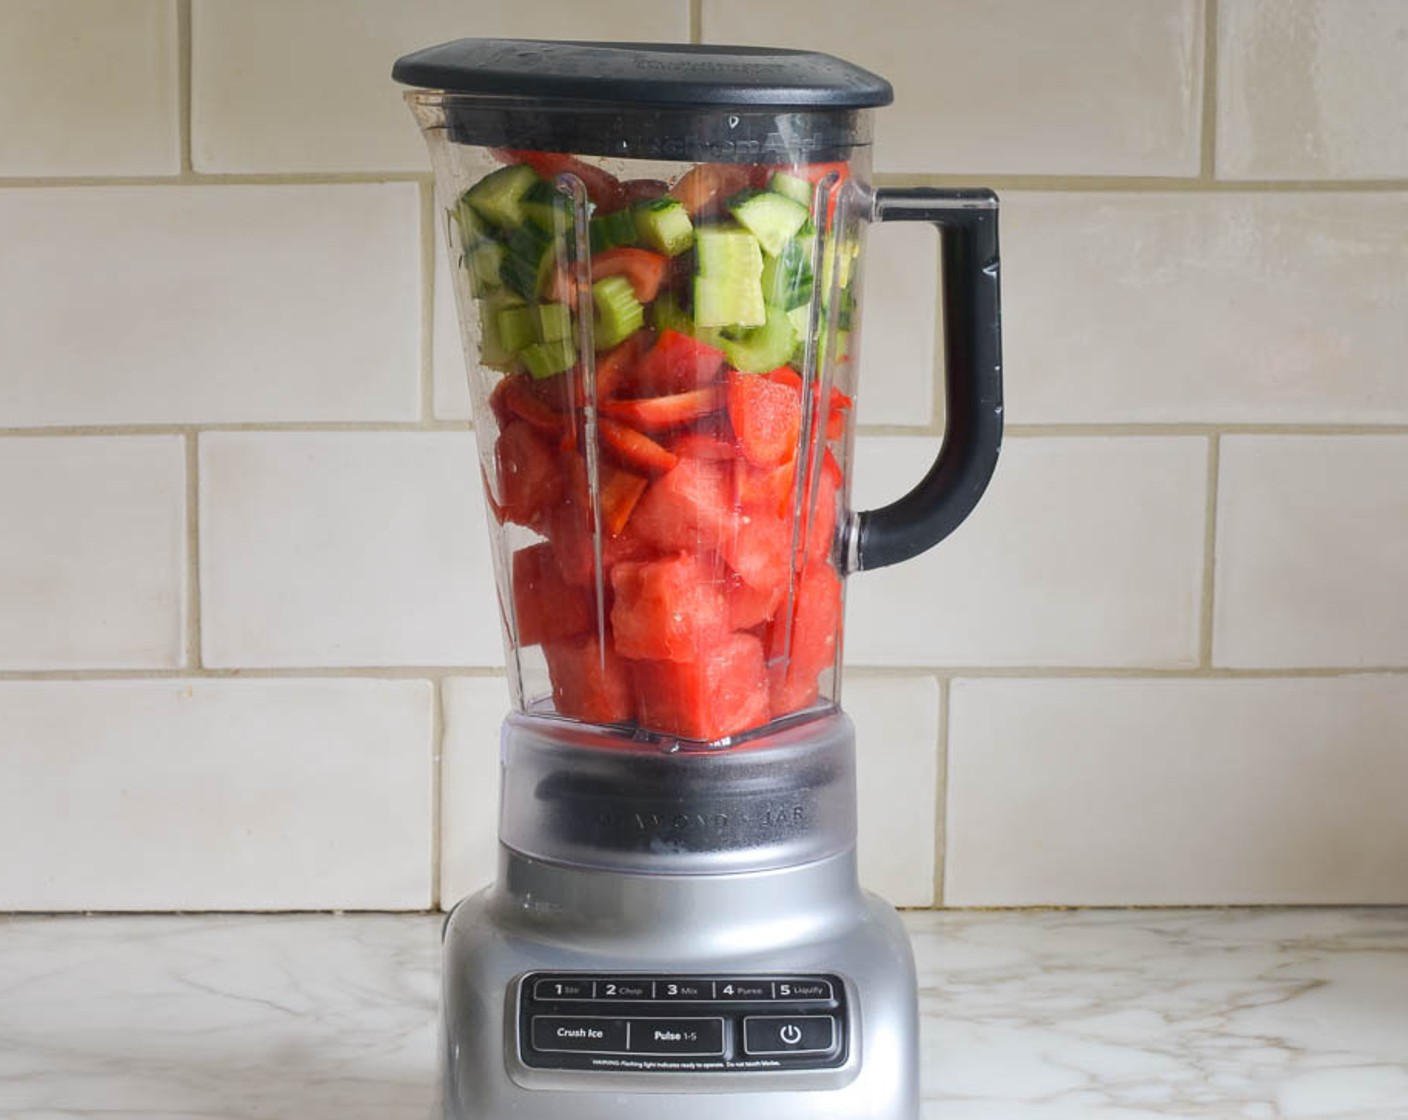 step 8 Put the Watermelon, Celery, Tomato, English Cucumber, Bell Pepper, Ginger, Red Chili Pepper (1/2), Fresh Basil Leaf (1 handful), Juice of Limes (2), Salt (1/2 tsp), and Ground Black Pepper (1/4 tsp) into a blender.